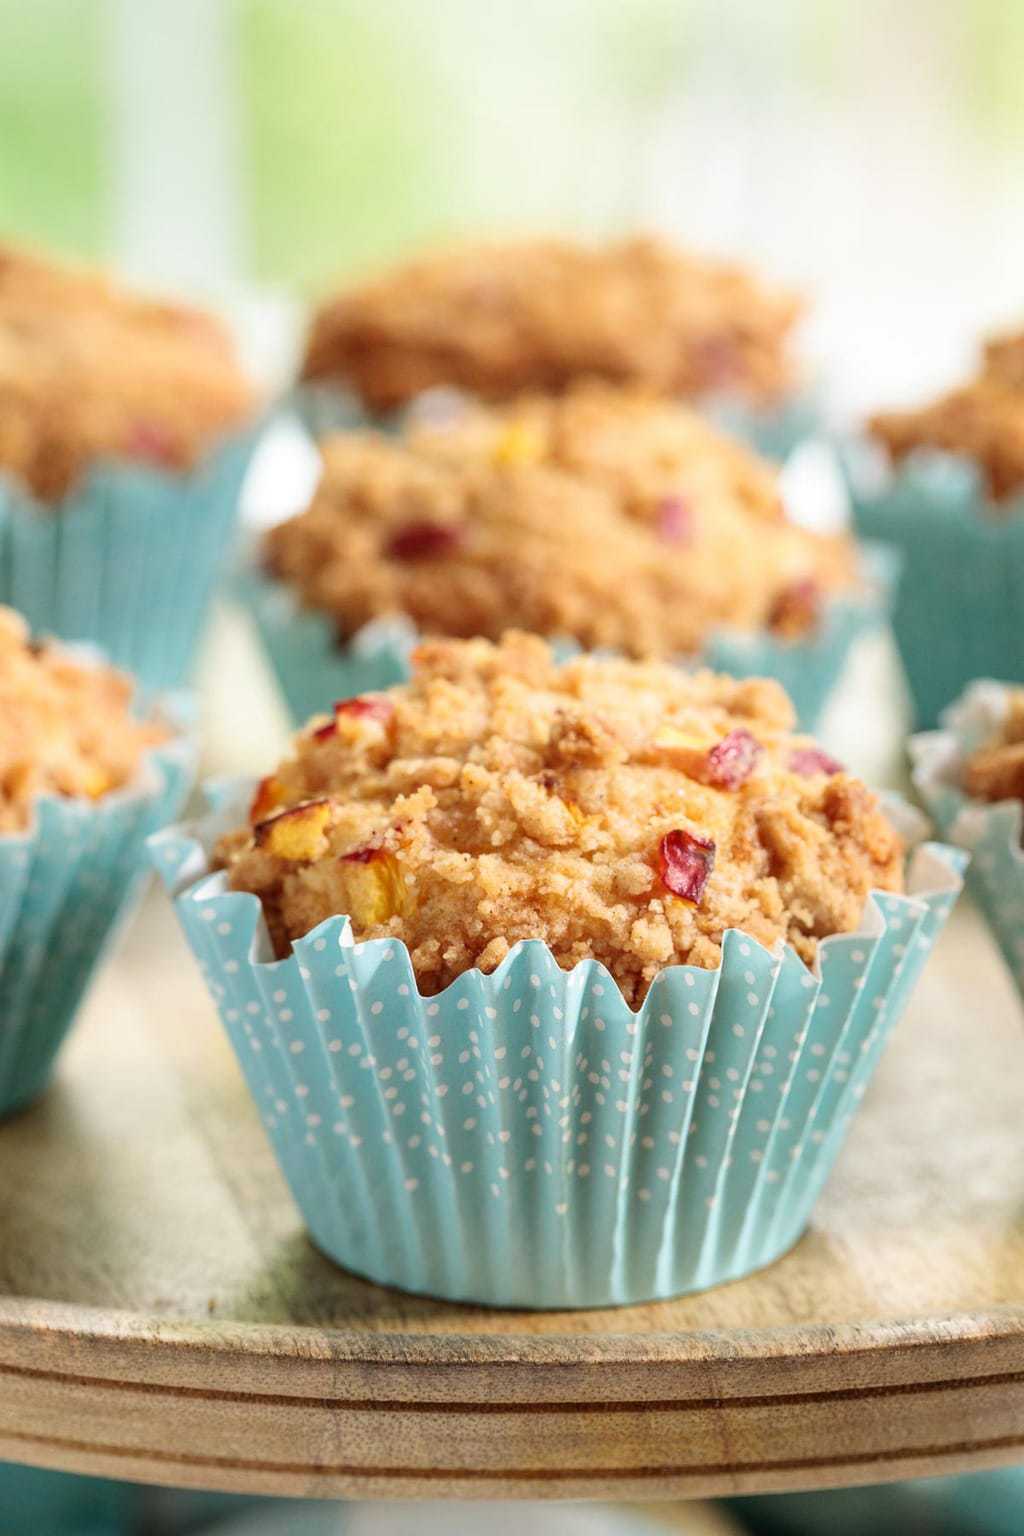 Vertical closeup photo of a batch of Peach Crumble Muffins in turquoise muffin liners on a wood serving plate.